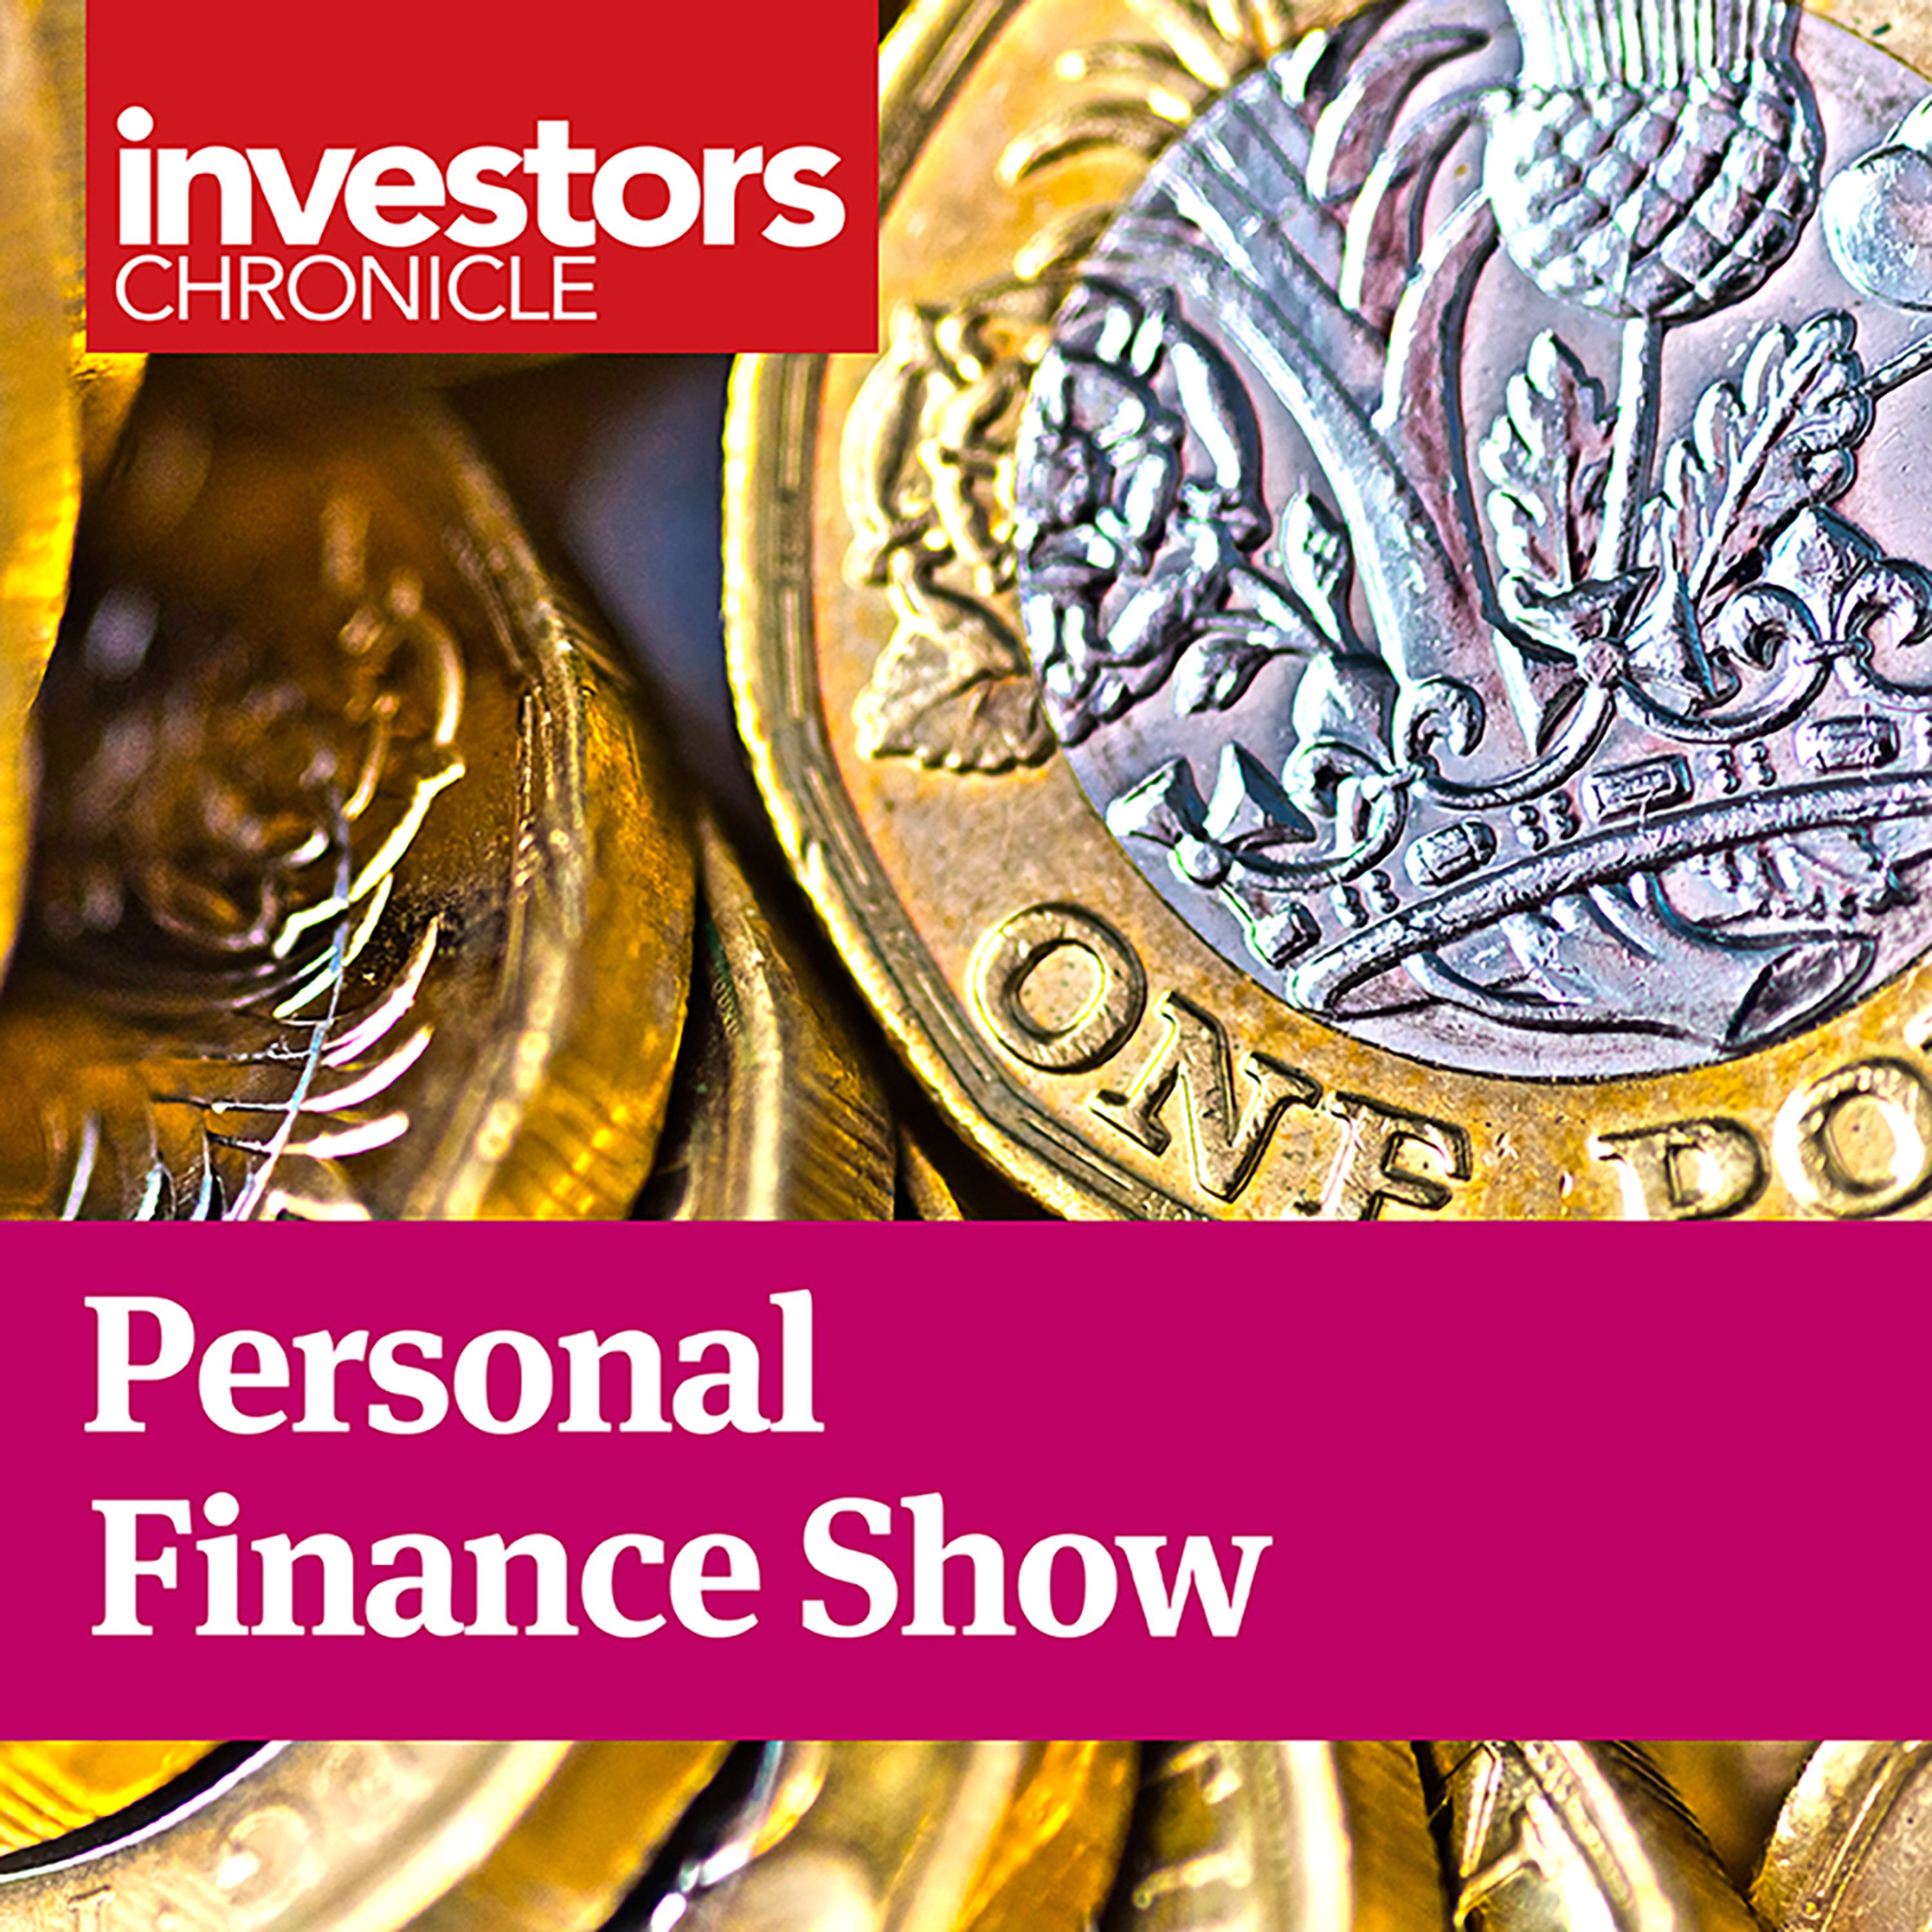 Personal Finance Show: The many uses of multi asset and the best bonds for income